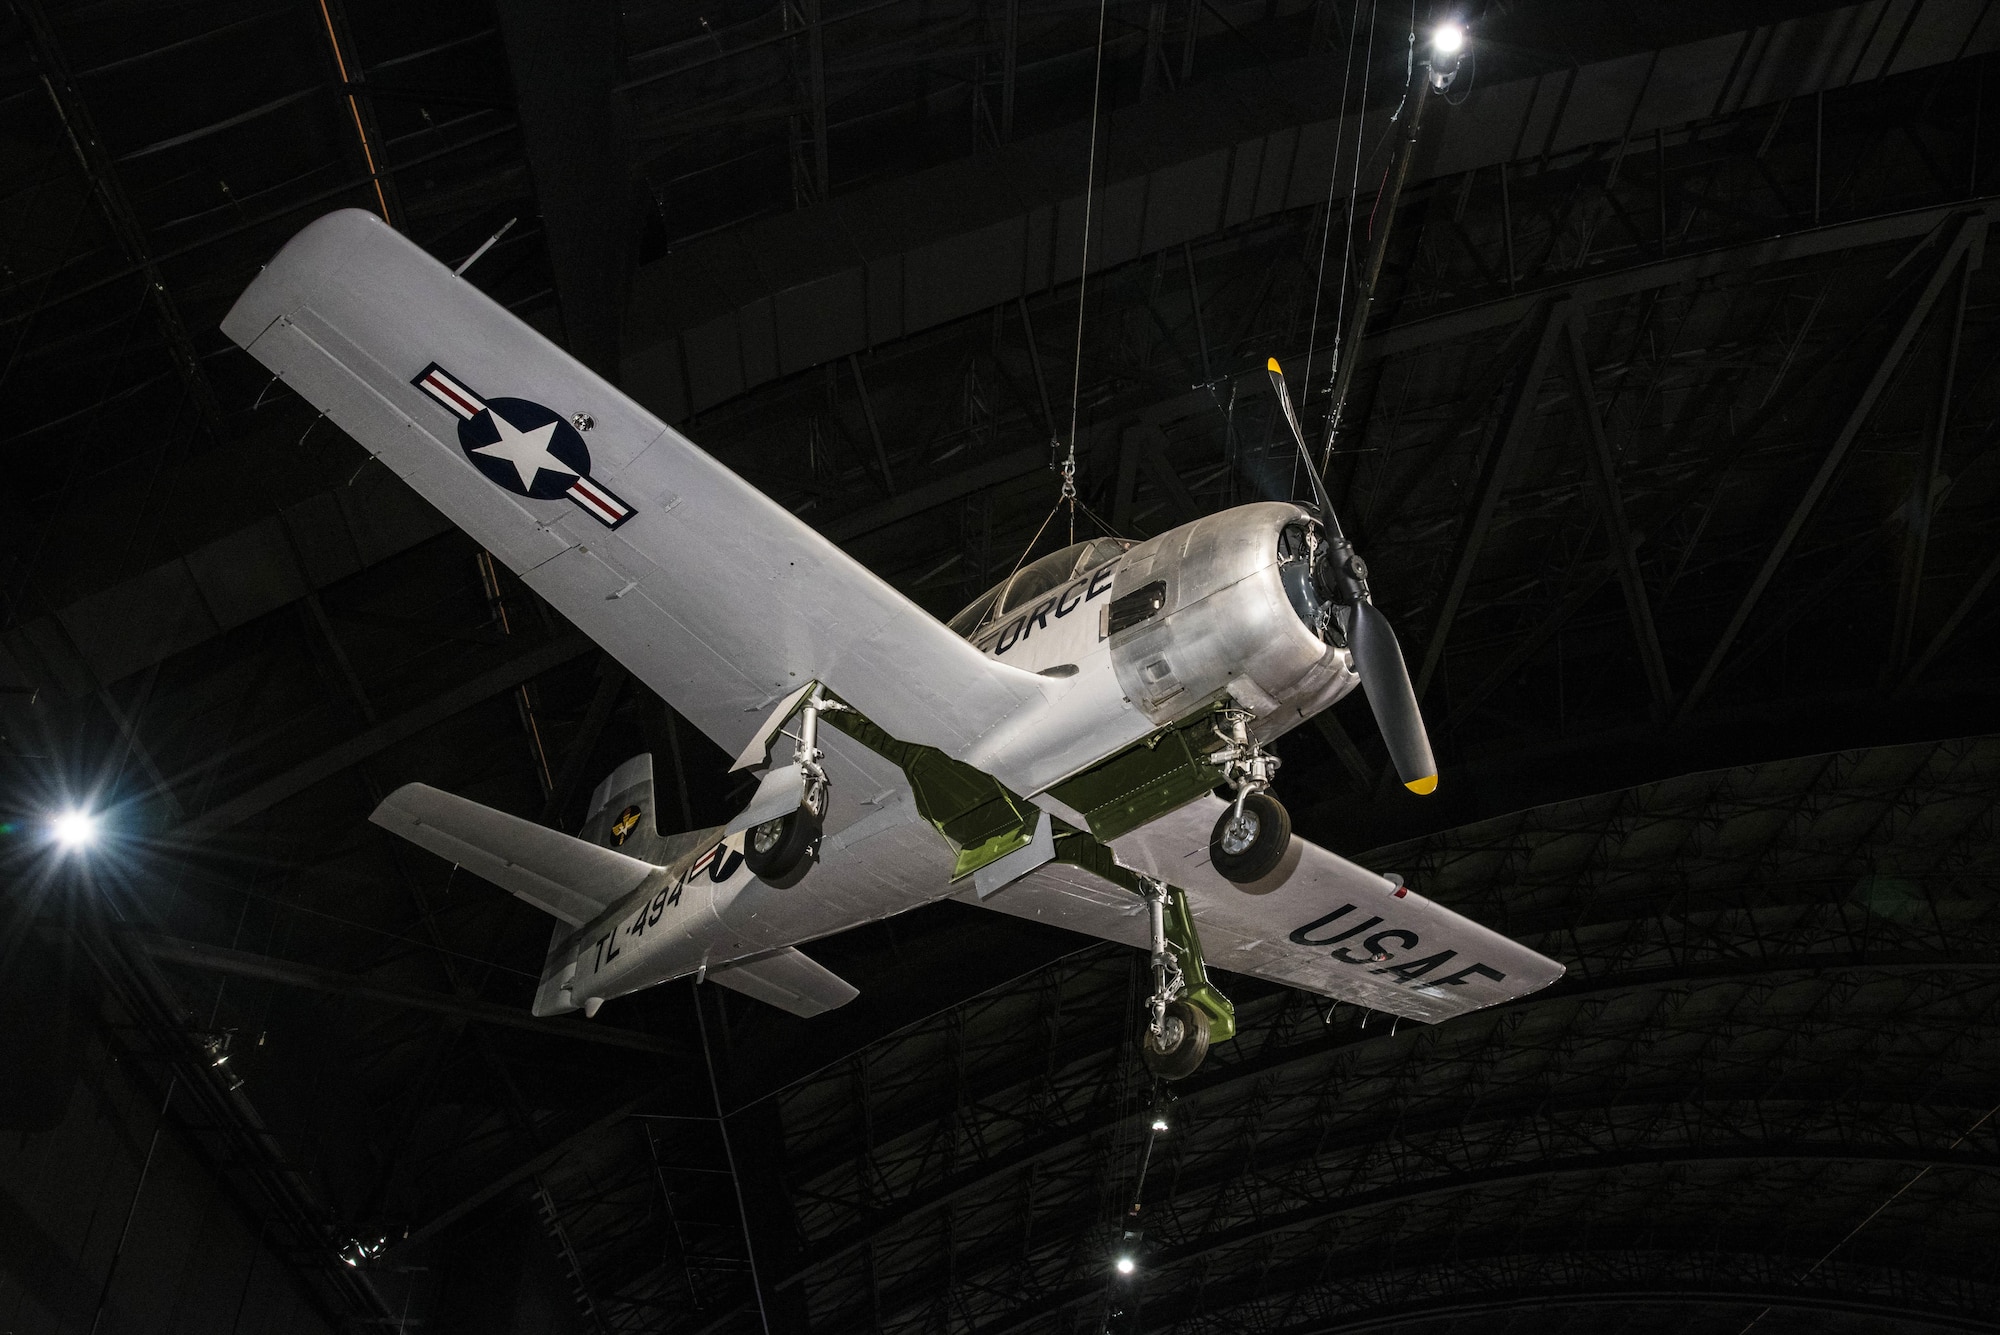 DAYTON, Ohio -- North American T-28A Trojan on display in the Cold War Gallery at the National Museum of the United States Air Force. (U.S. Air Force photo)